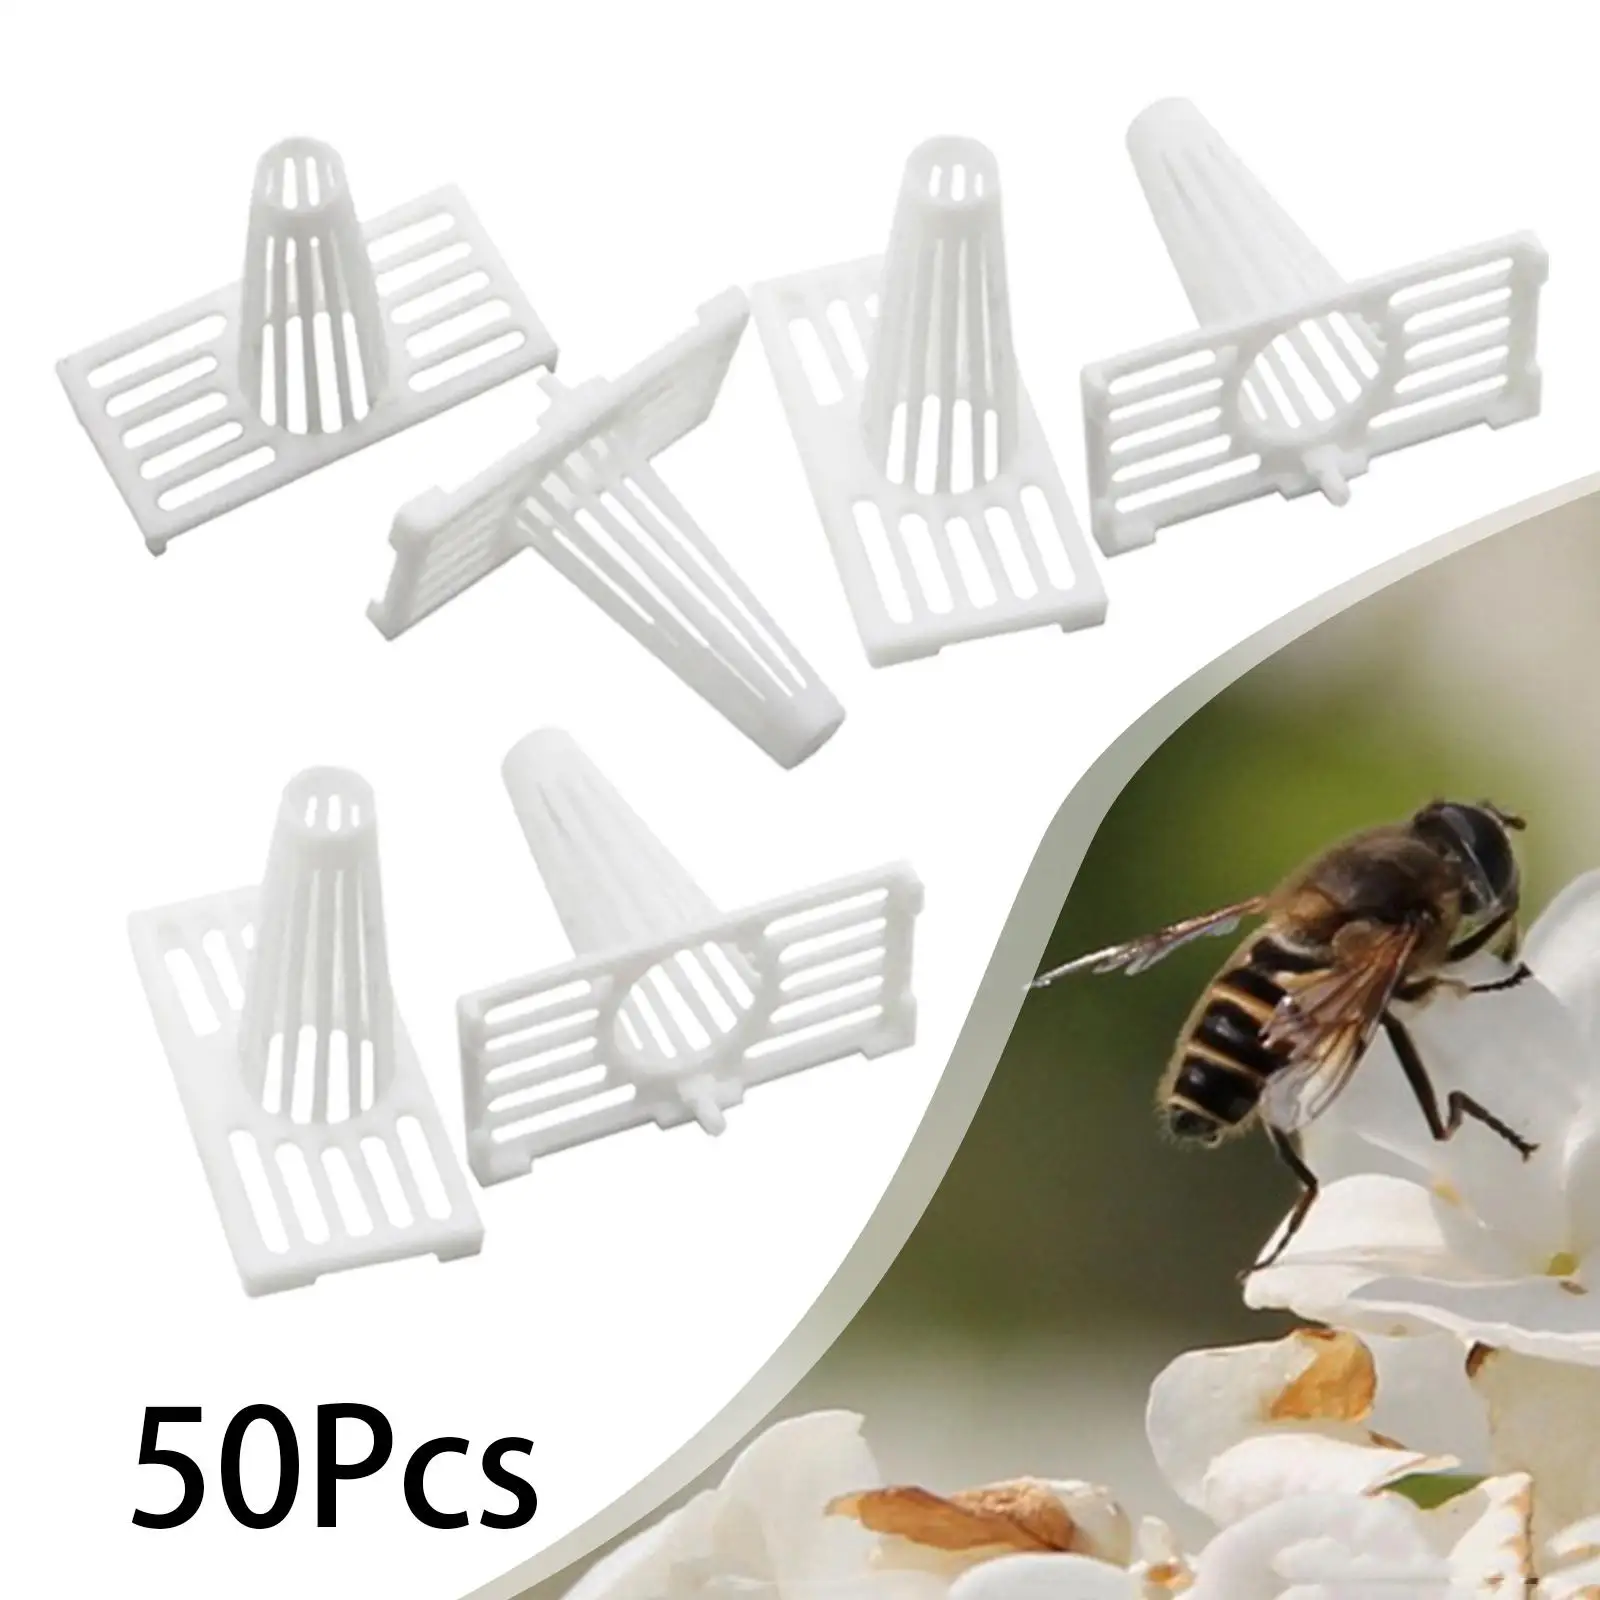 50Pcs Bee Hive Frame Nest Gate Beekeepers Tool Outdoor for Workshop Multipurpose Durable Equipment Reusable Apiculture Bee Tool